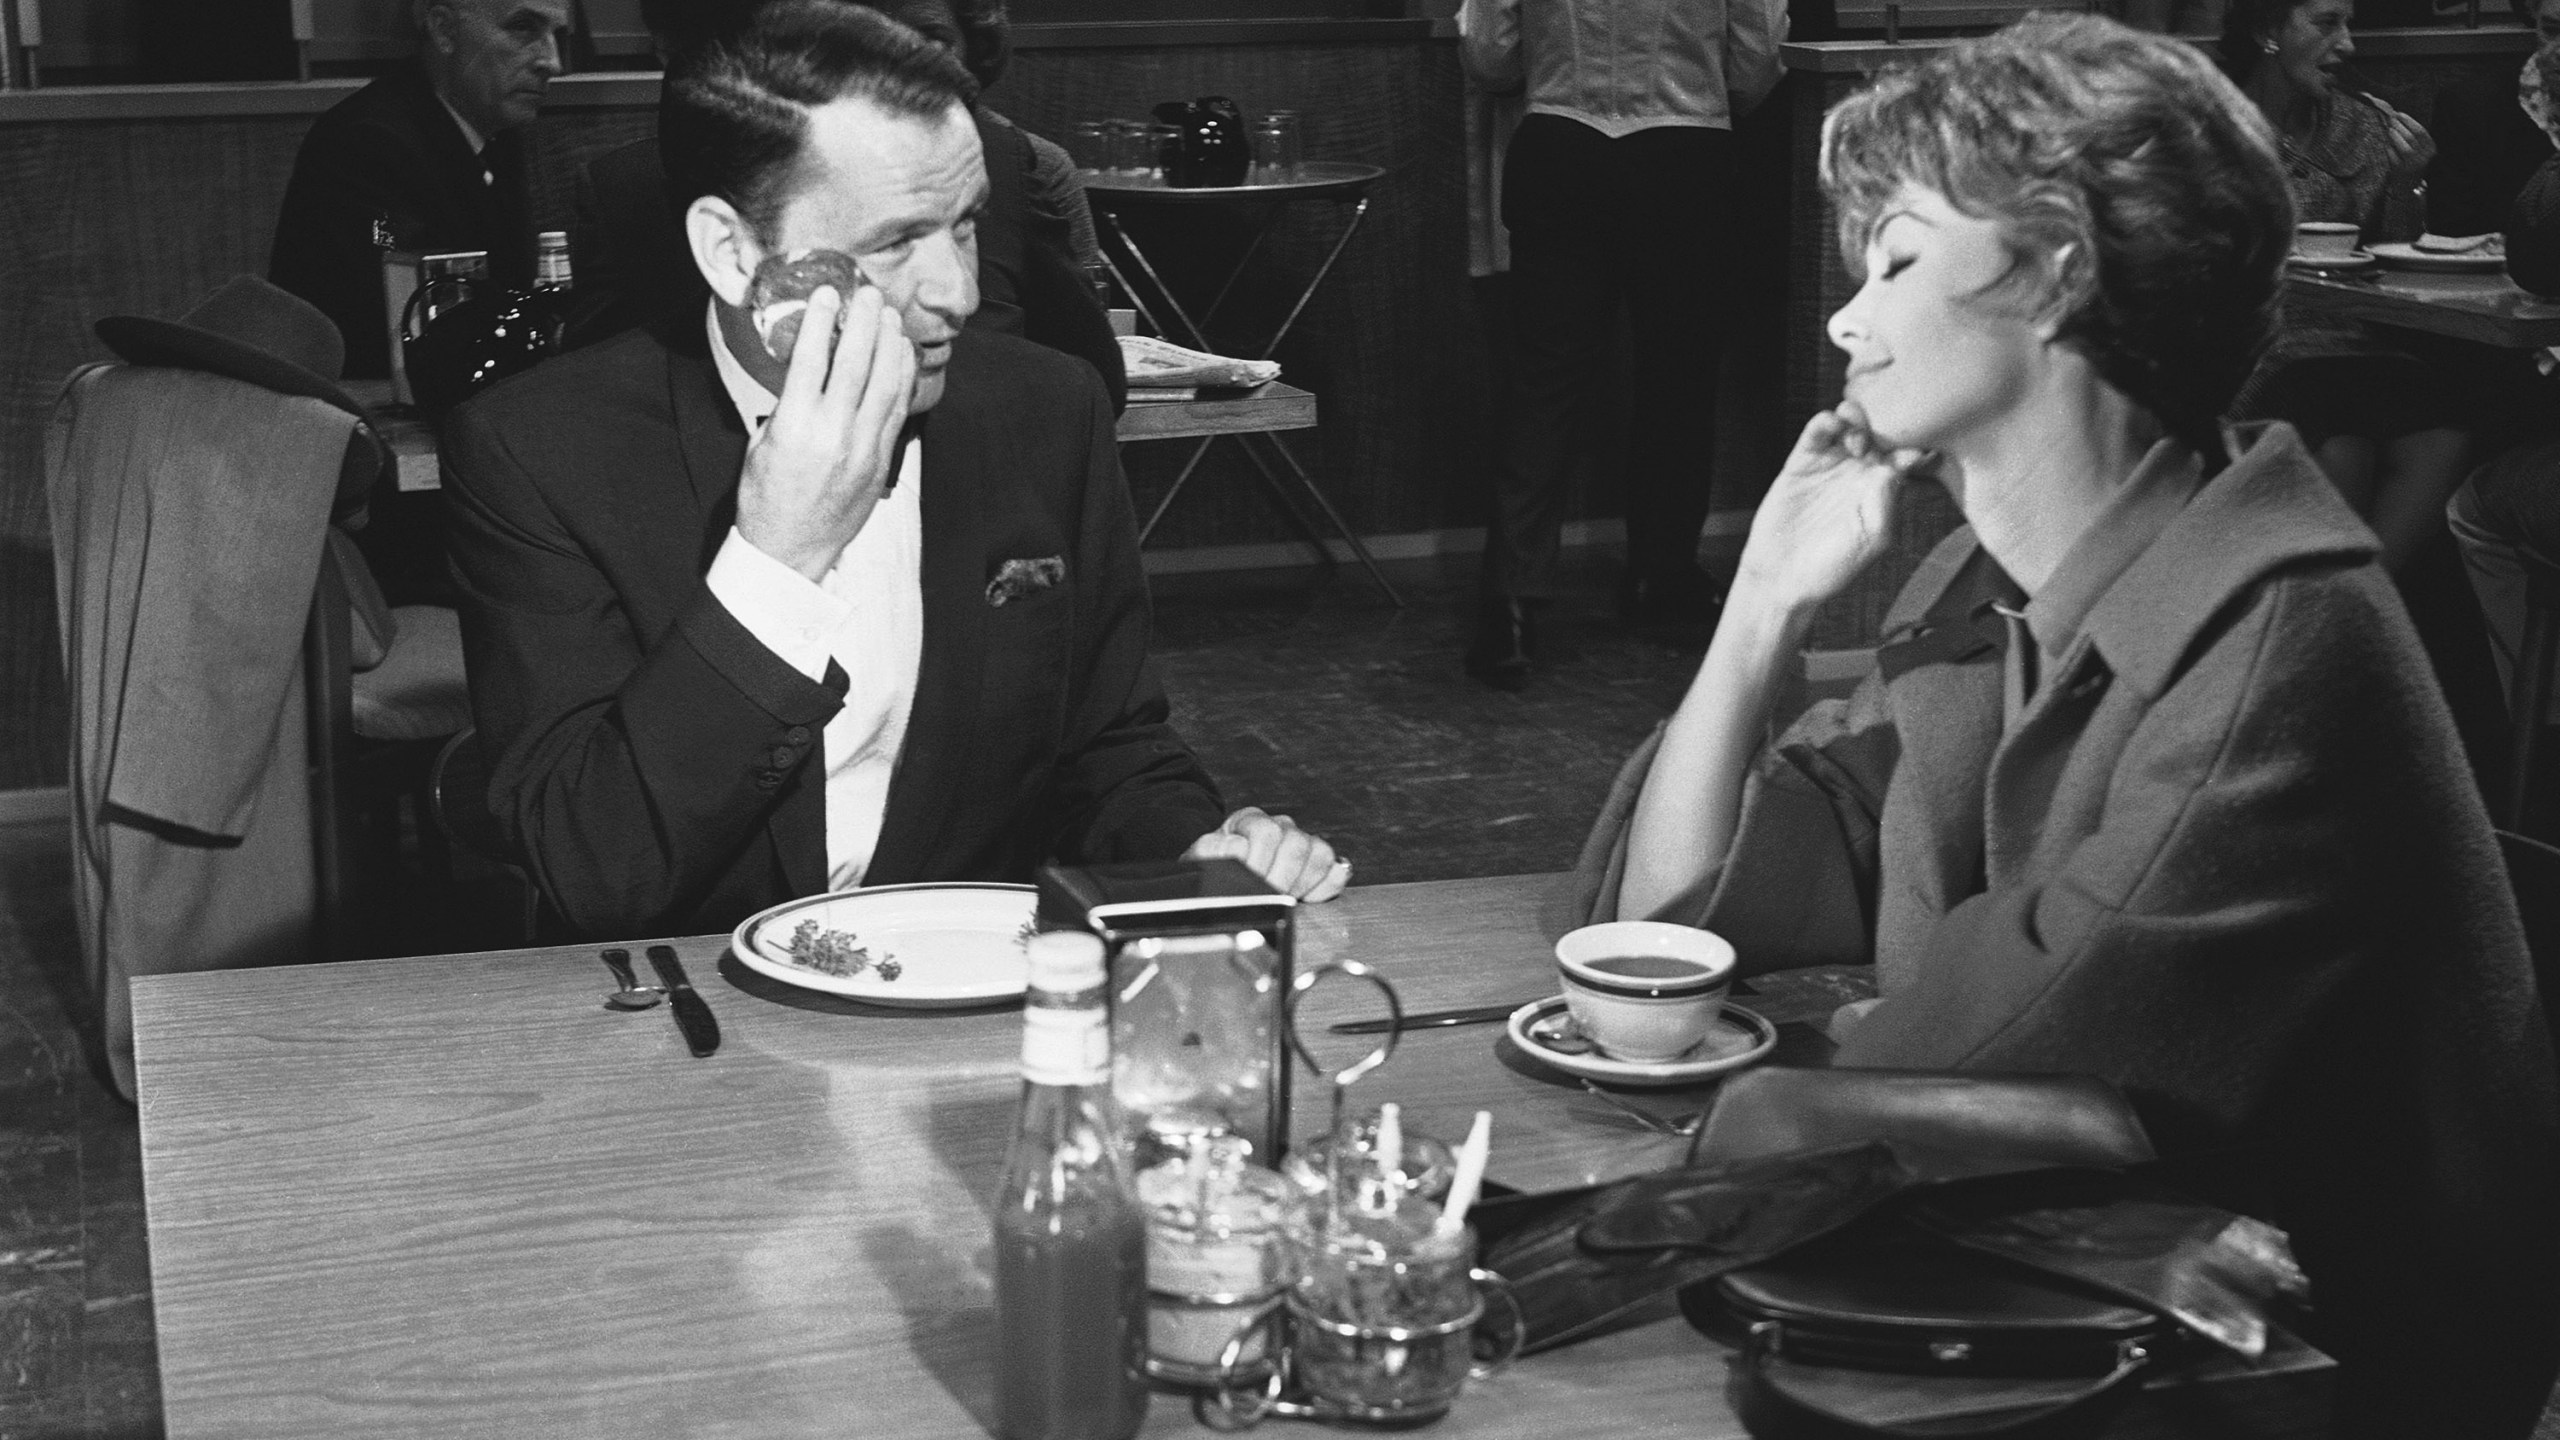 FILE - Frank Sinatra, left, appears with Barbara Rush in a scene from the film "Come Blow Your Horn" in Los Angeles on Sept. 11, 1962. Rush, who co-starred in films with Frank Sinatra, Paul Newman and other leading men of the 1950s and 1960s and had a thriving TV career later in life, died Sunday, March 31, 2024 at age 97. (AP Photo/Don Brinn, File)